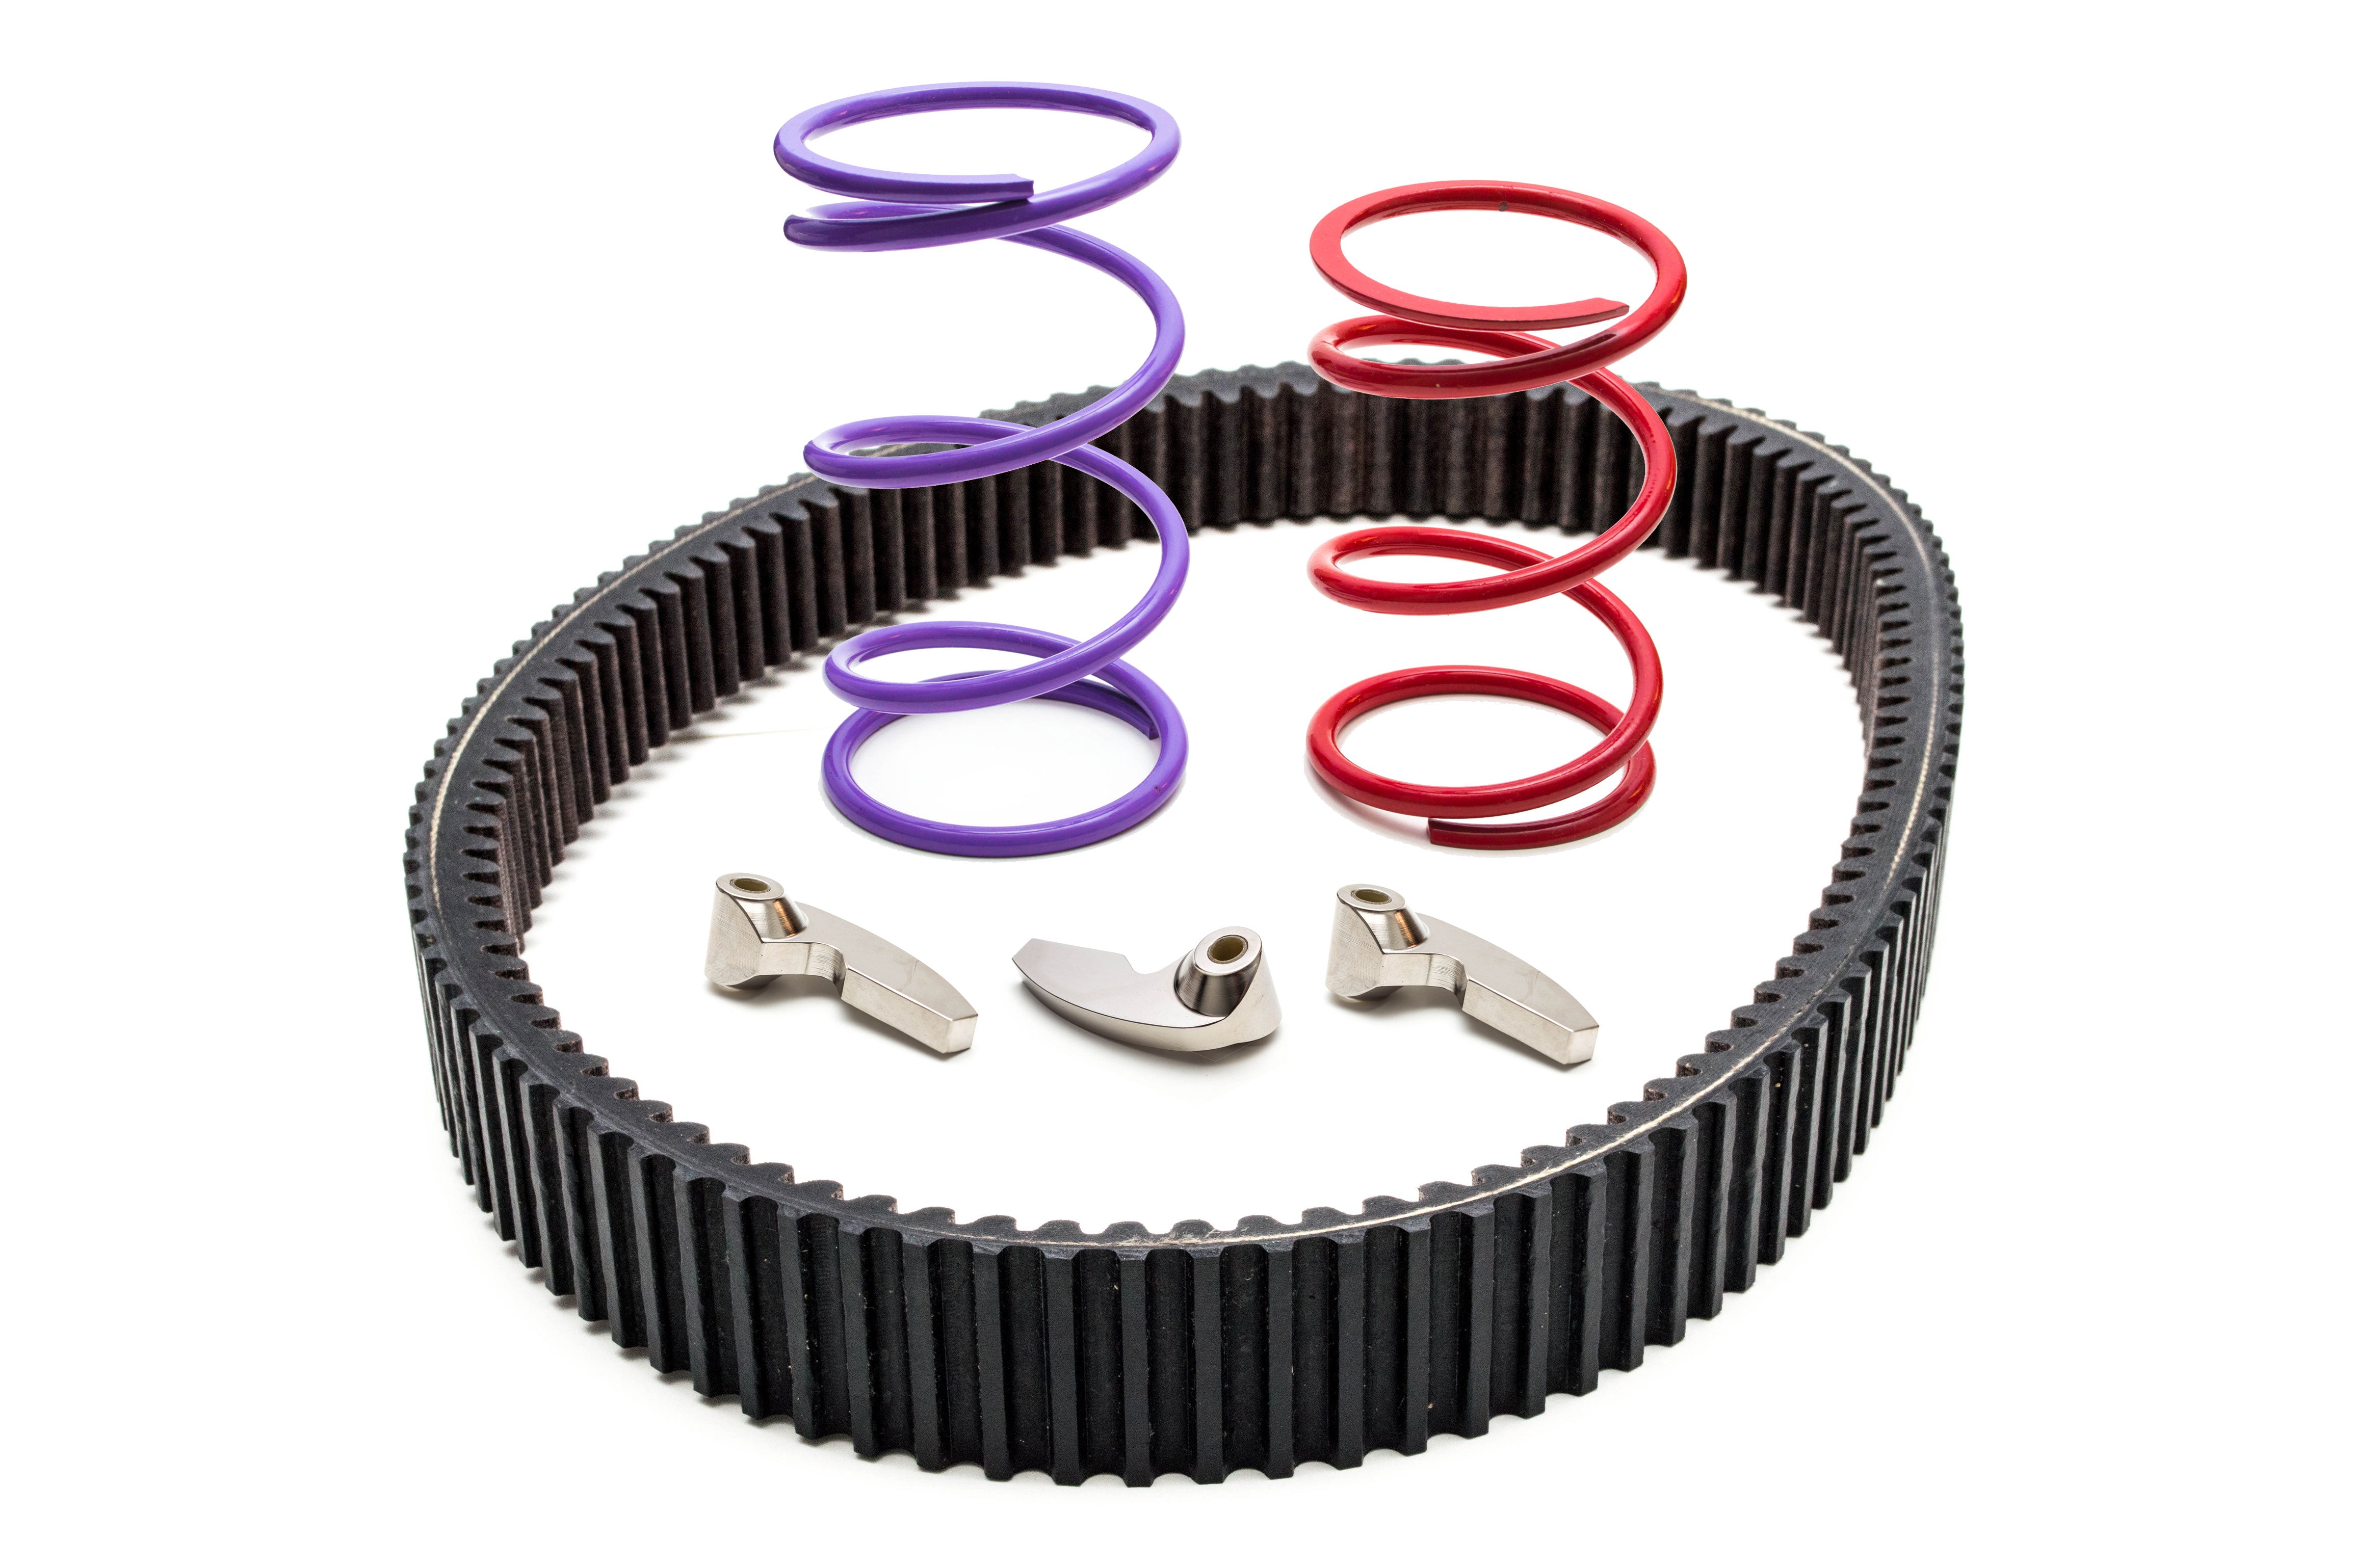 Clutch Kit for RZR TURBO / S (0-3000') 30-32" Tires (2021)